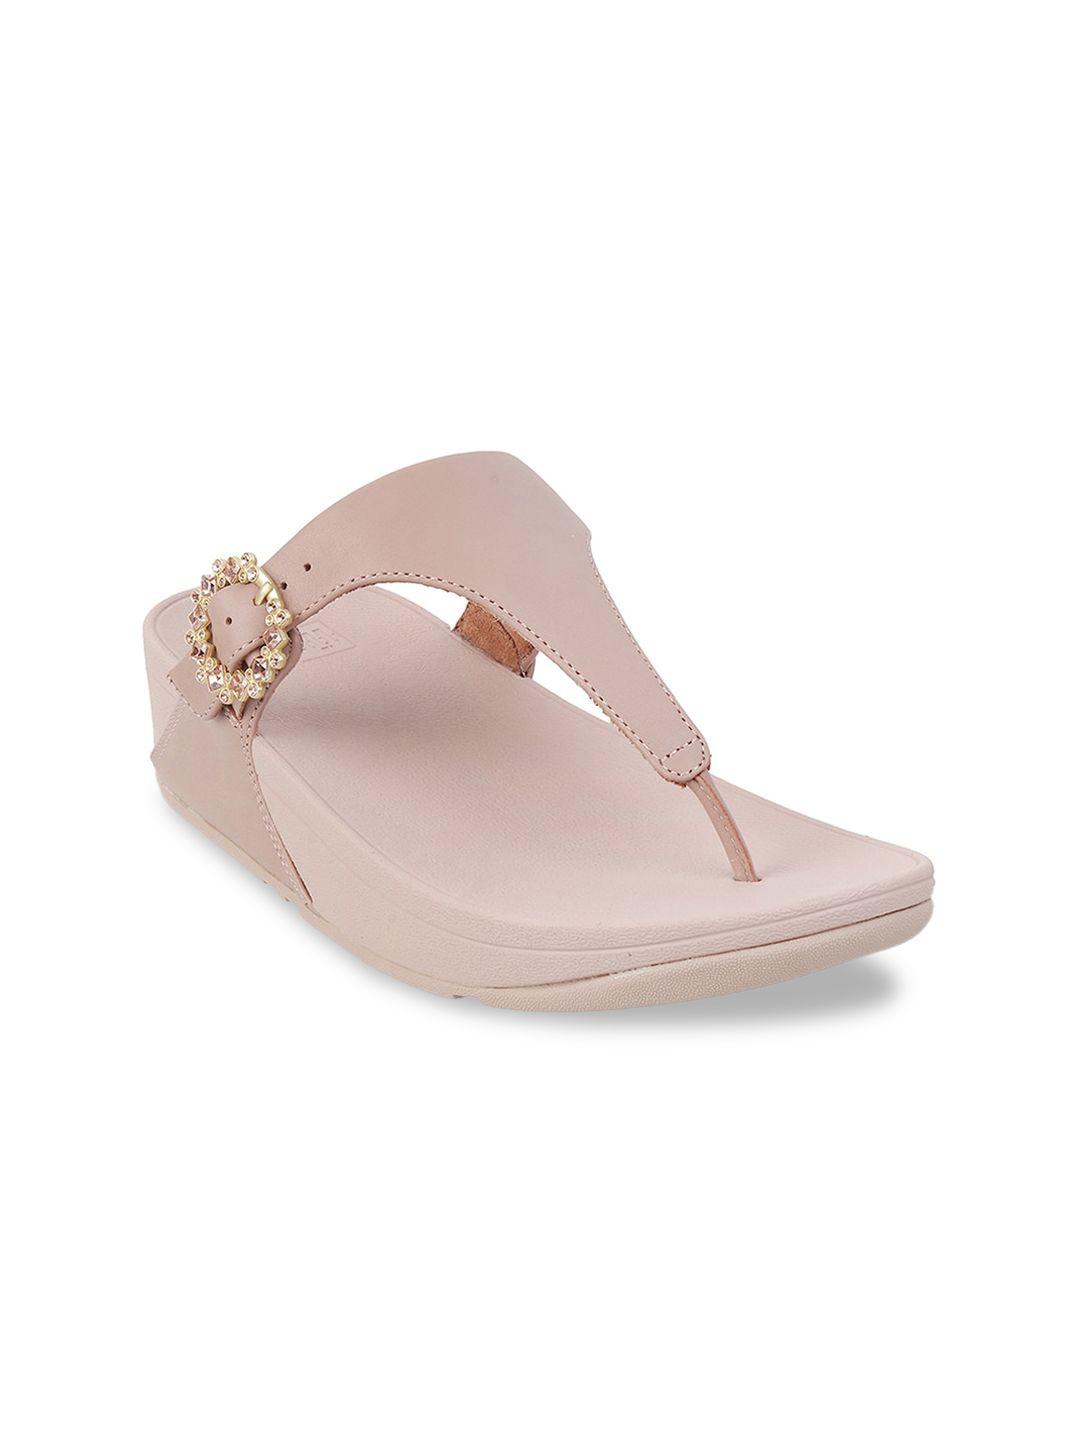 fitflop women peach-coloured leather comfort sandals